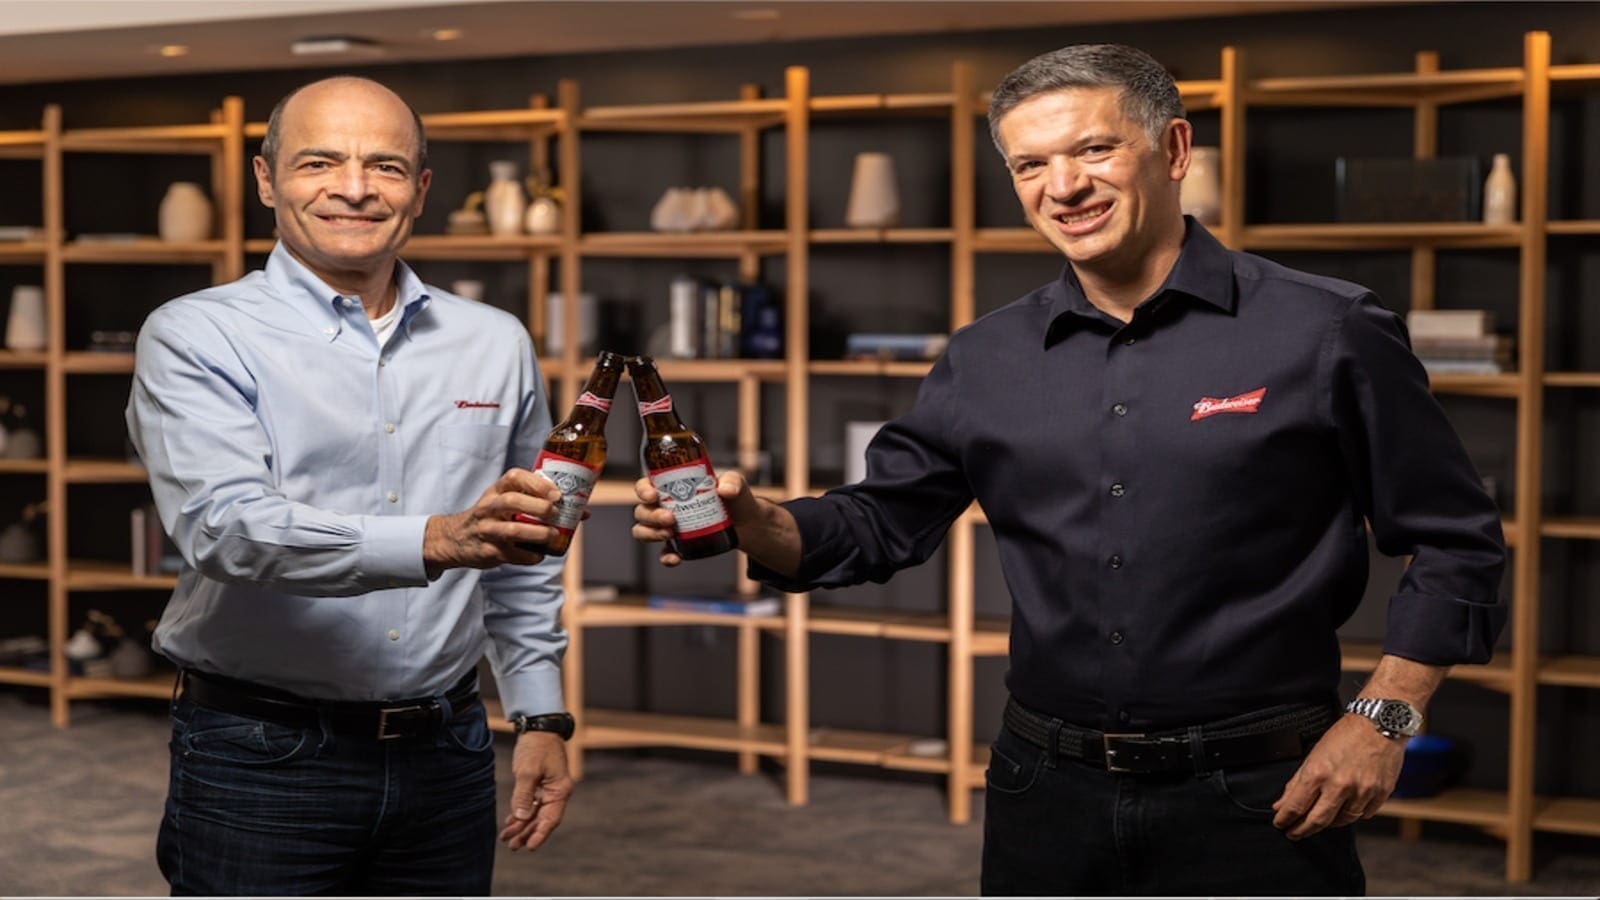 AB InBev names new CEO to succeed Carlos Brito, reports 17.2% rise in Q1 revenues